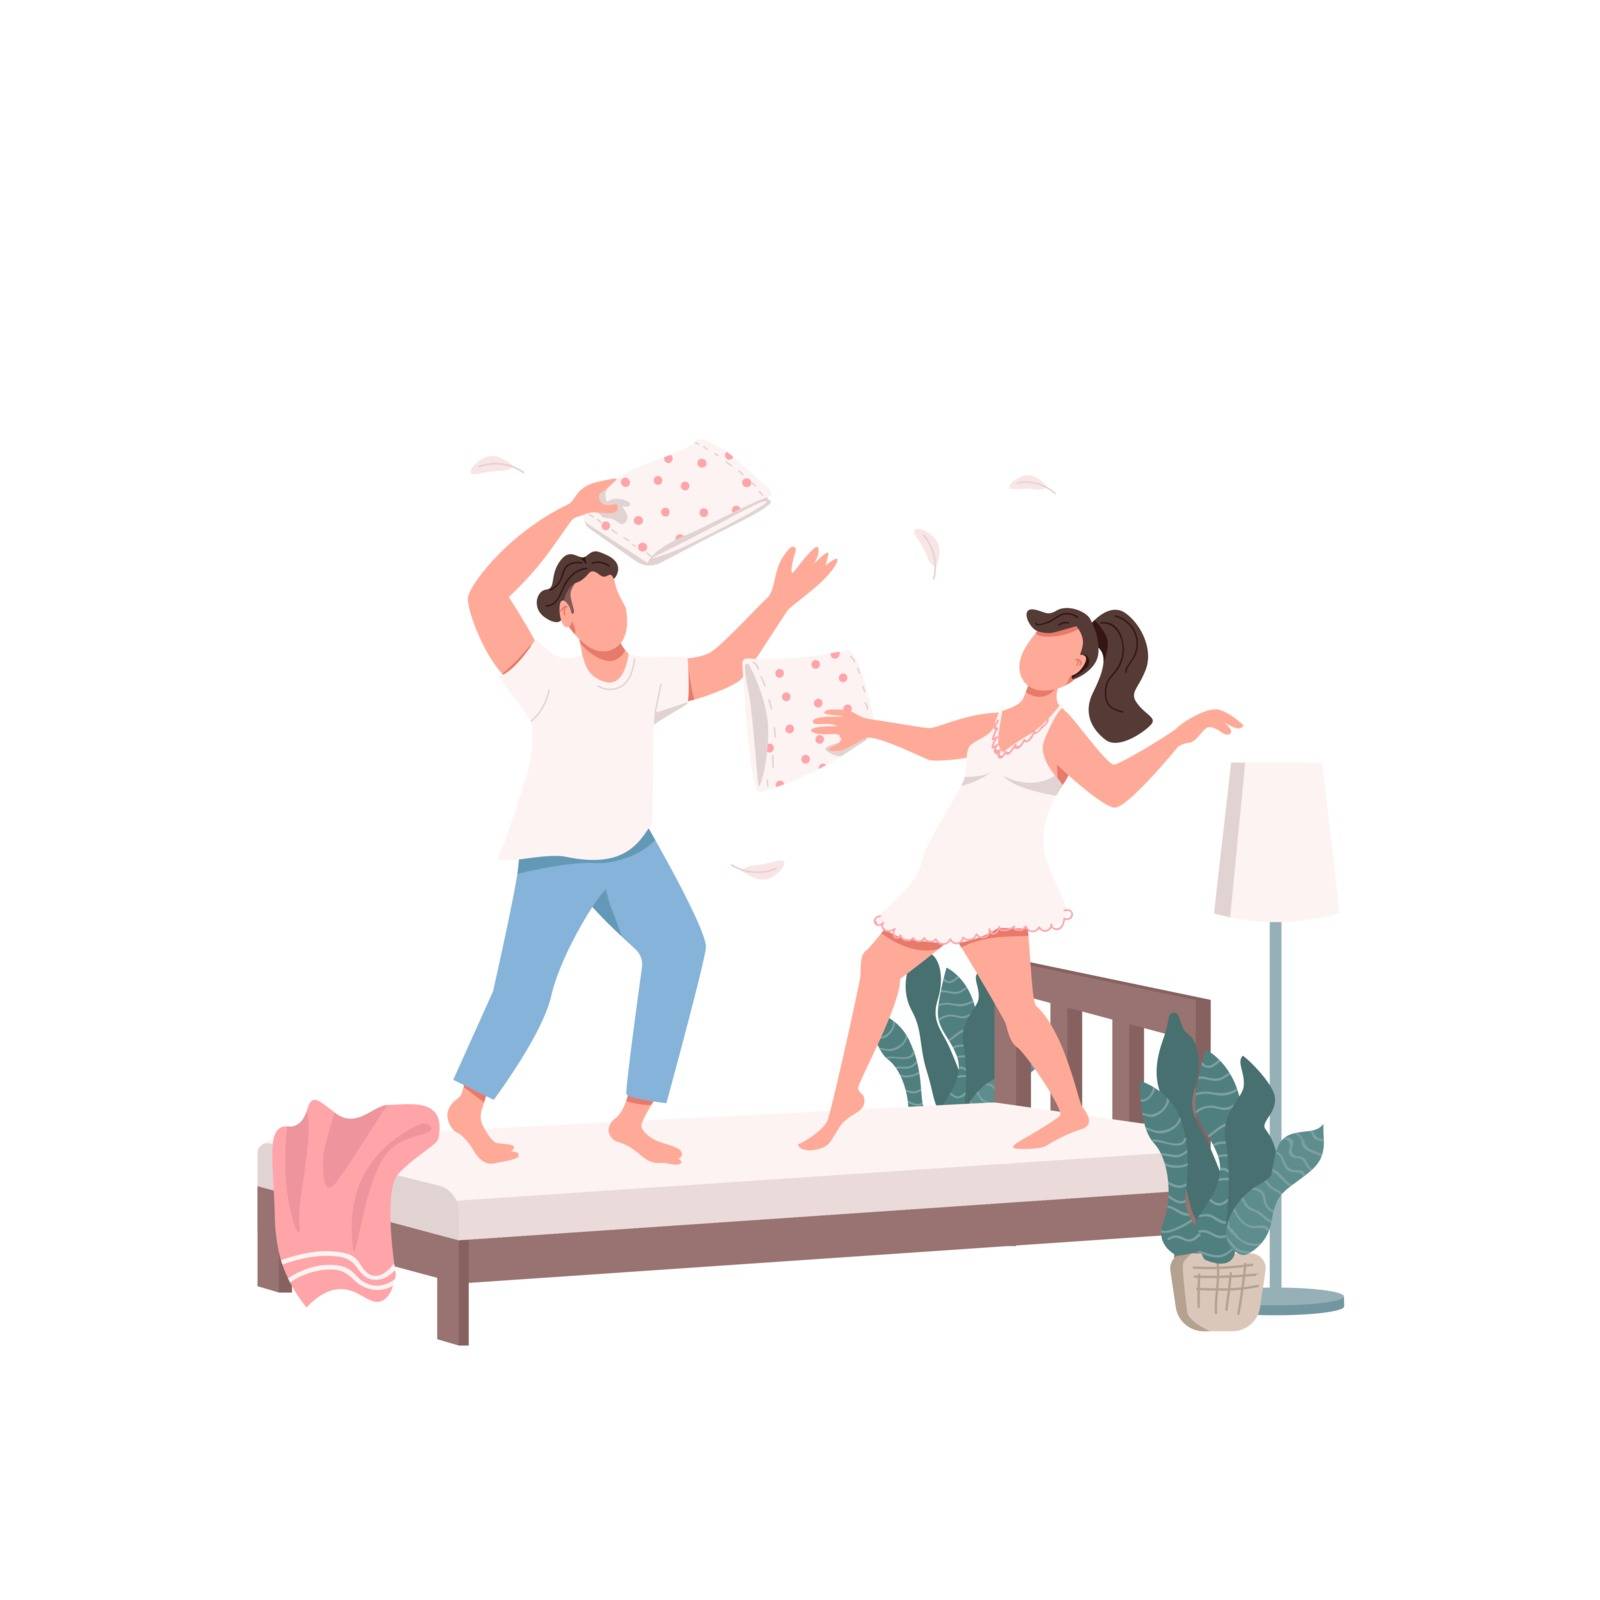 Happy playful couple leisure activity flat color vector faceless characters. Pillow fight. Young wife and husband having fun together isolated cartoon illustration for web graphic design and animation